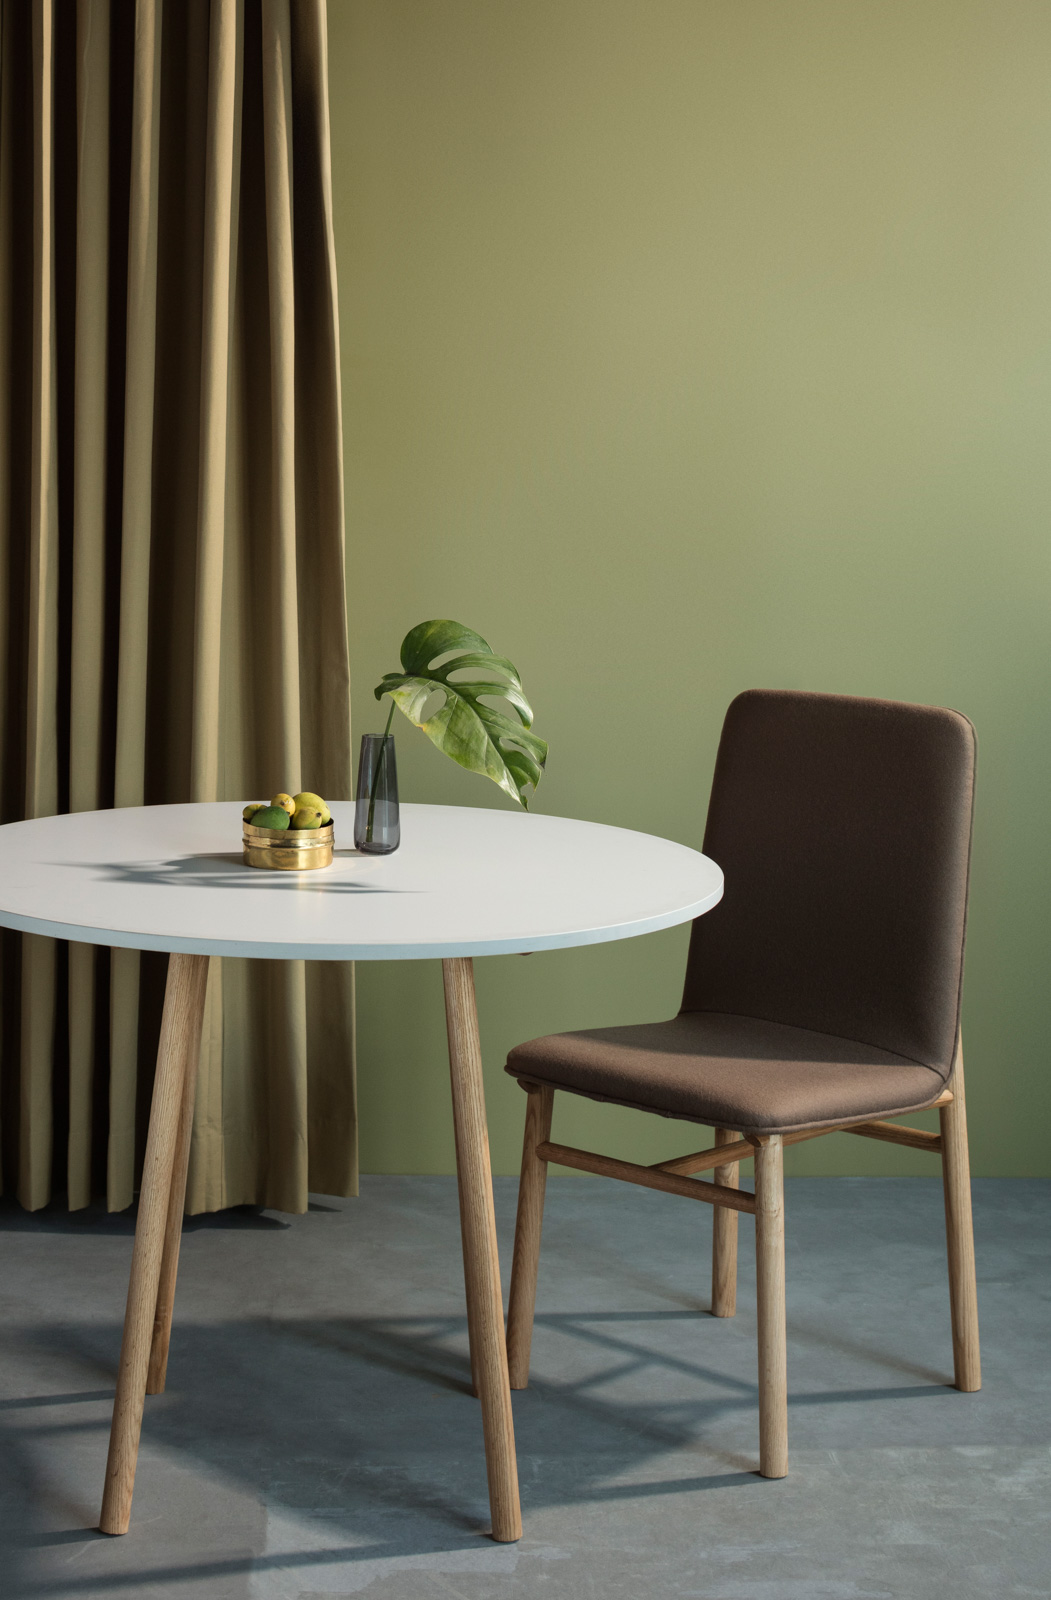 Moving away from ornamental table designs, the ‘Stem’ dining table is put together with pure minimalism. It offers 21 possible configurations in a mix of design and materials. The ‘Fold’ dining chair with its distinctive cushion—single plane with a bend—is designed by Daniel Rous from England in the way of a traditional high-back. Made from beech wood, it is accentuated by comfortable angles that provide optimal posture. 